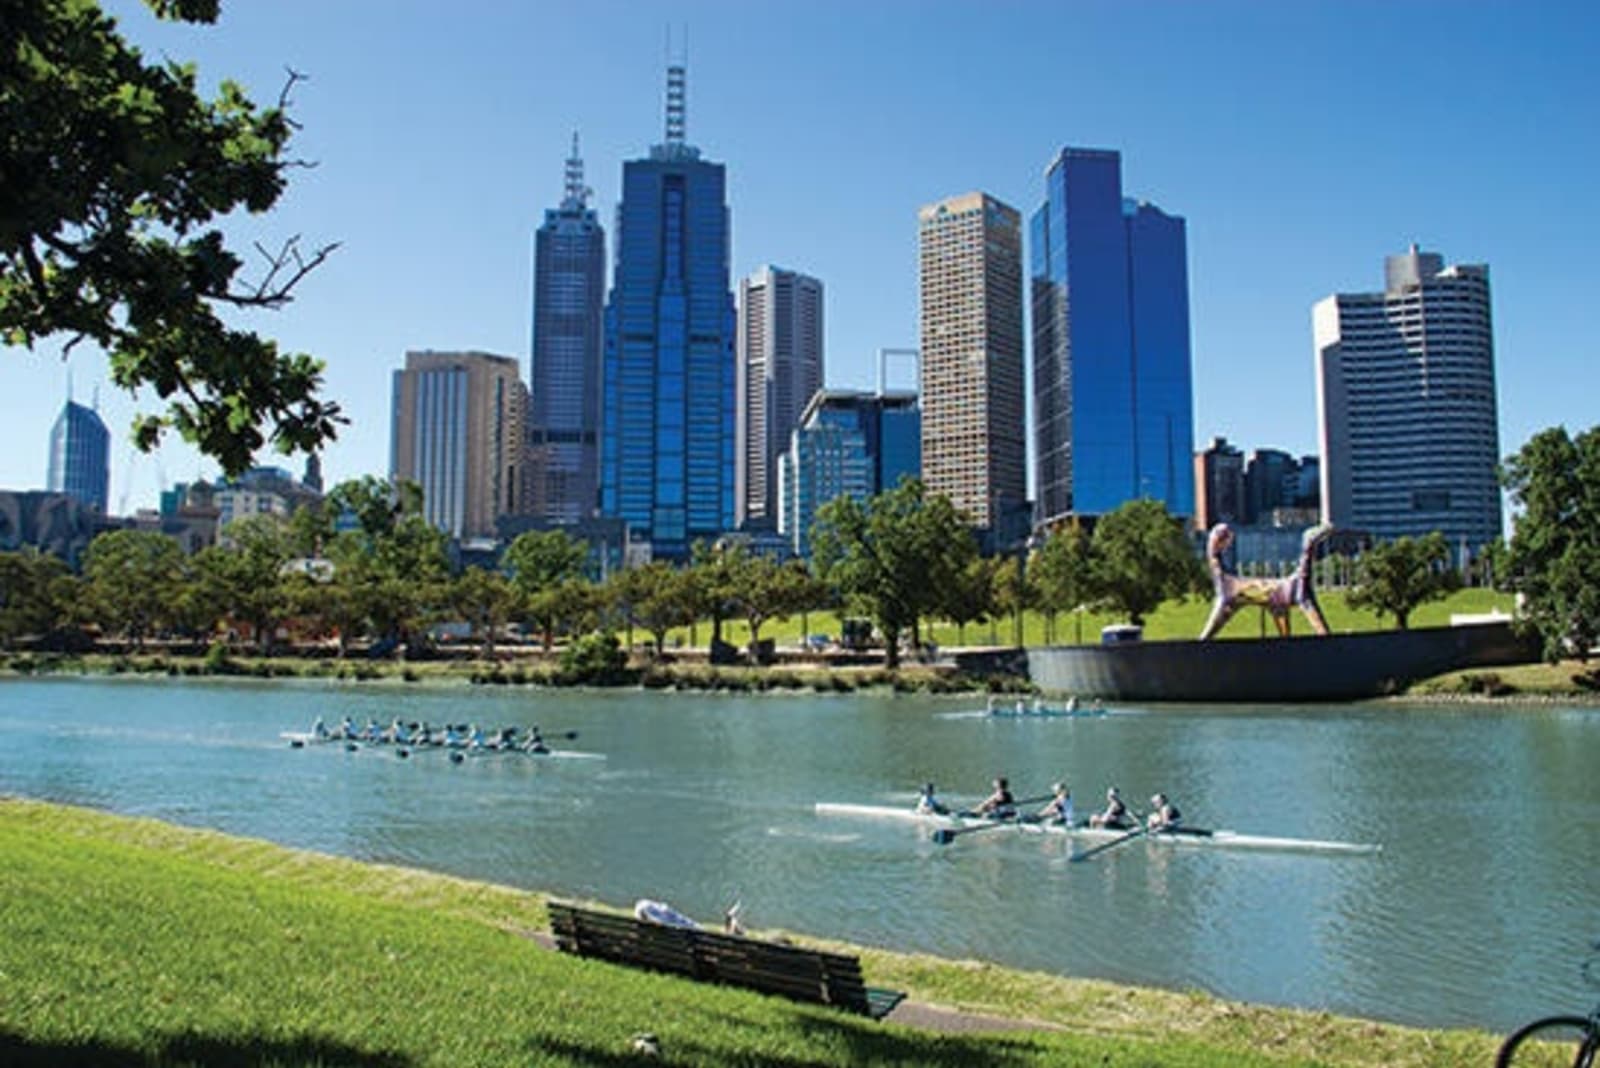 2 groups of people kayaking in Melbourne river with city in background.